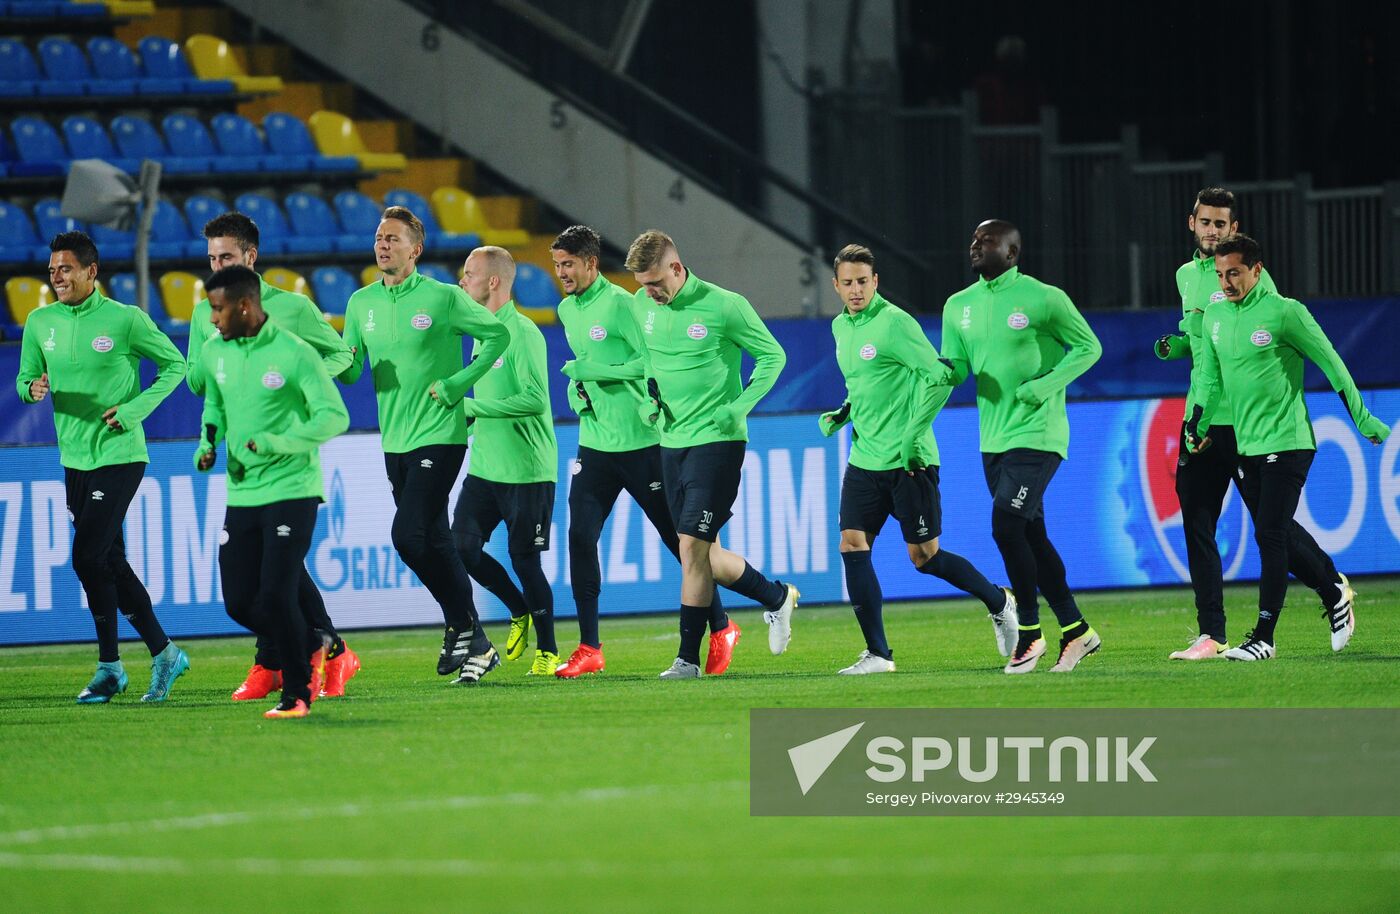 Football. League of Champions. PSV holds training session